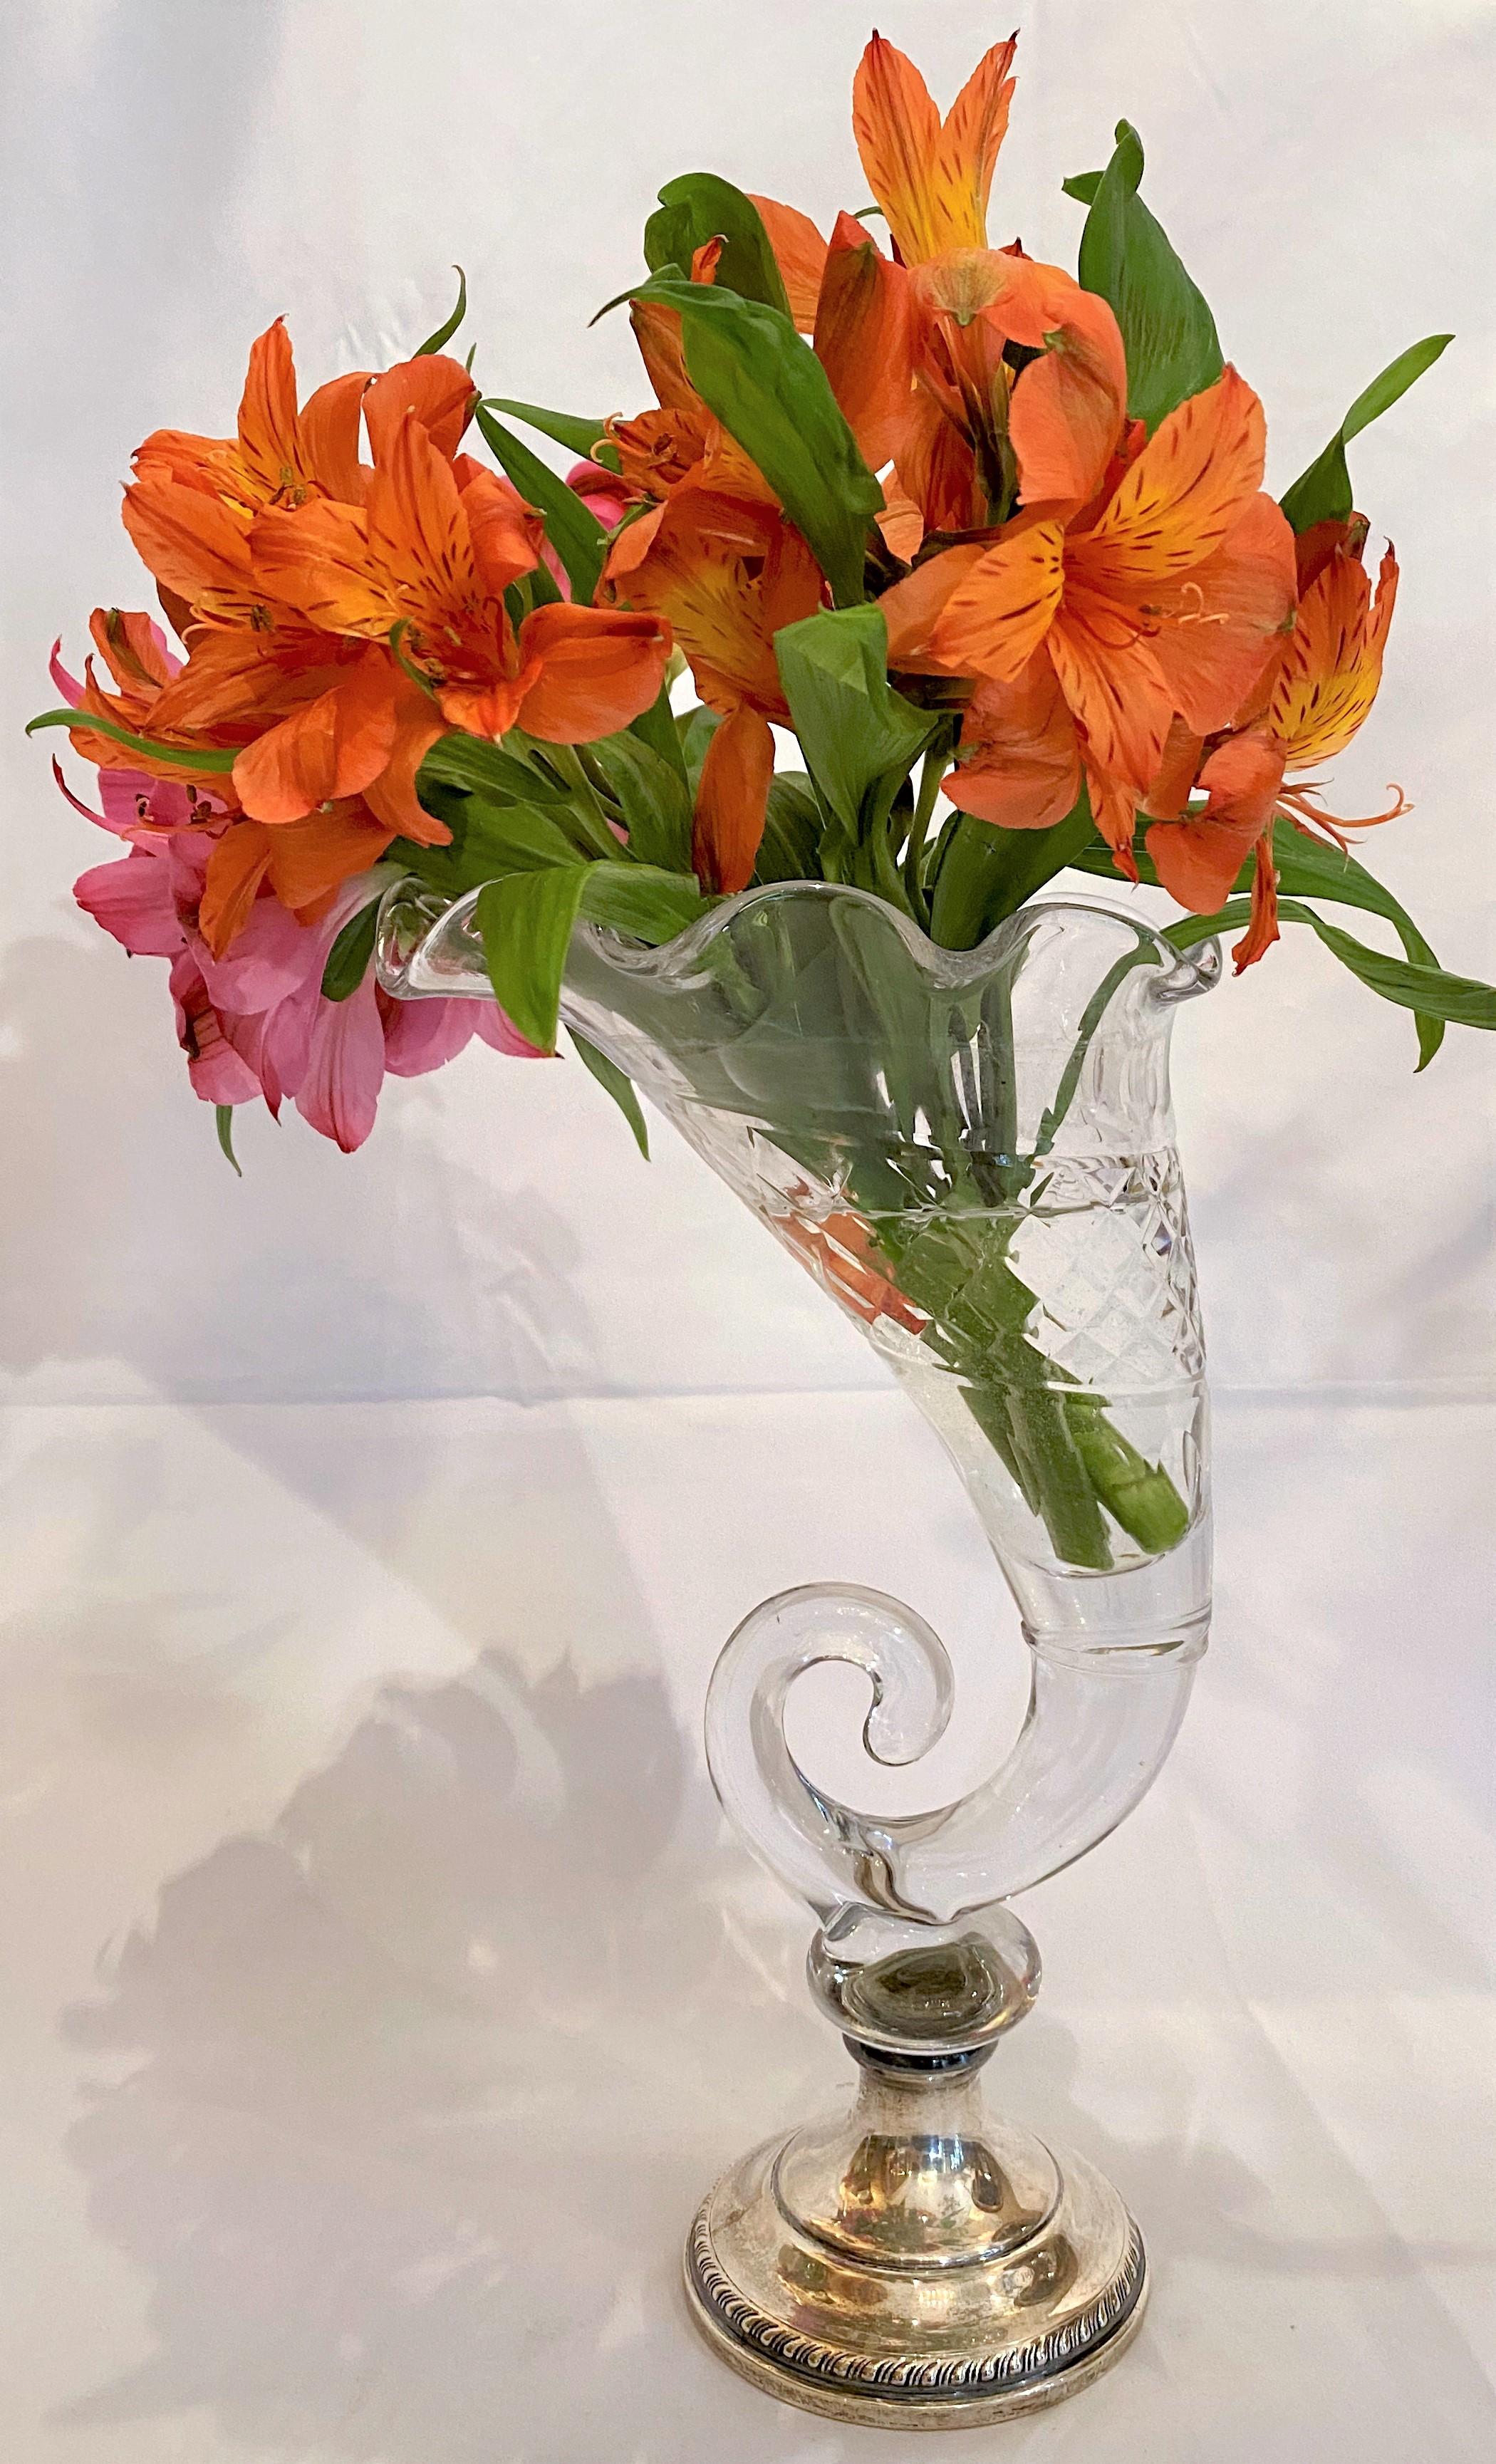 These floral vases are very fetching. It is hard to capture their beauty in photographs.